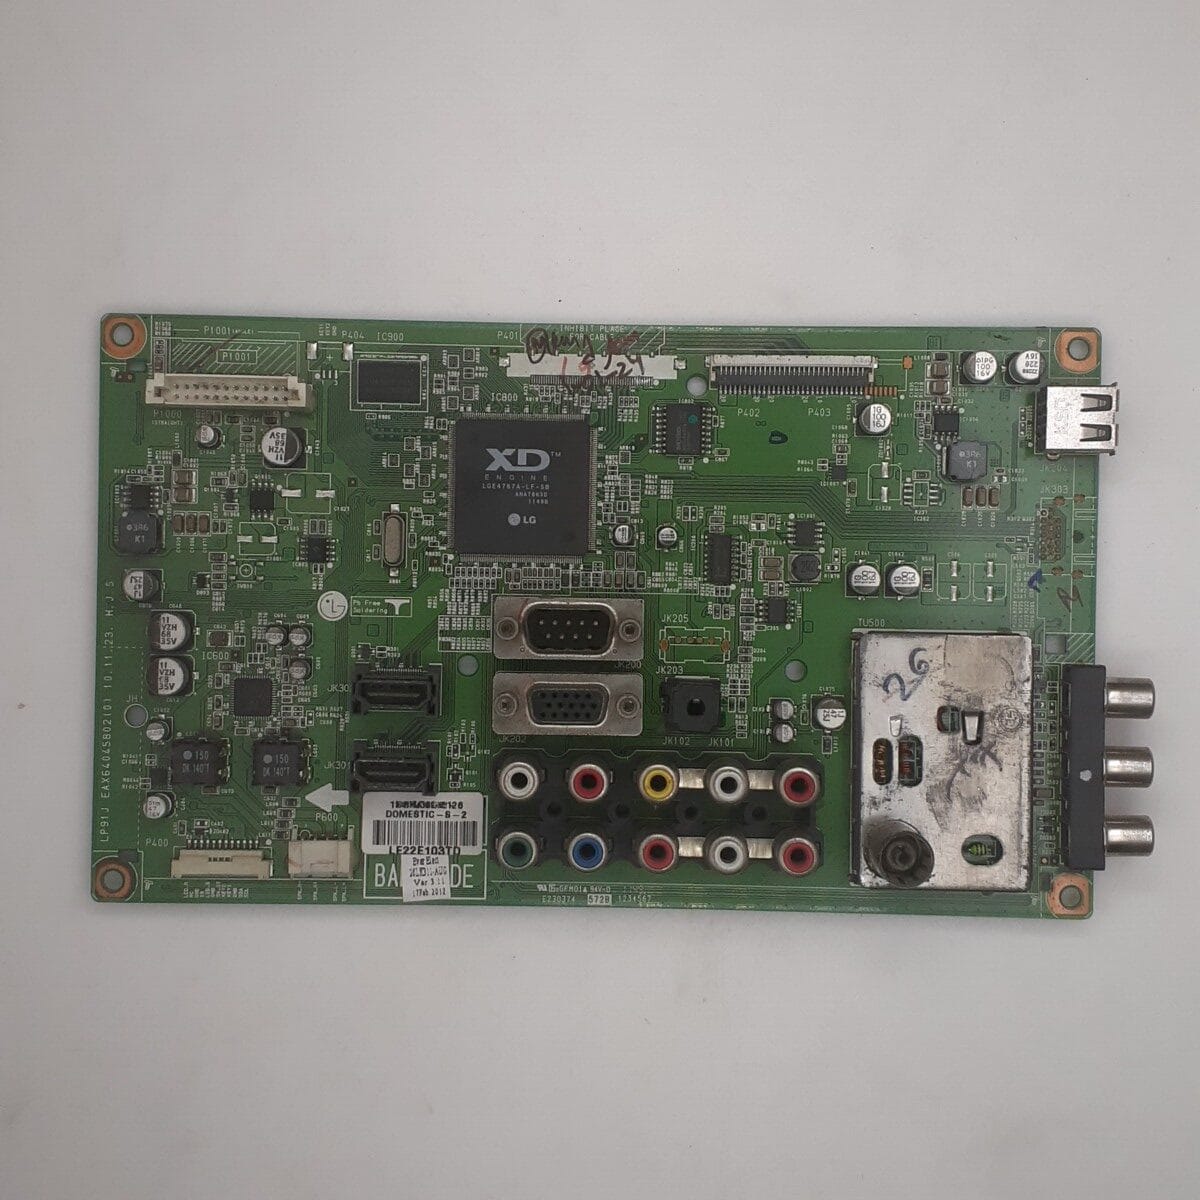 26LK311 AUO LG MOTHERBOARD FOR LED TV